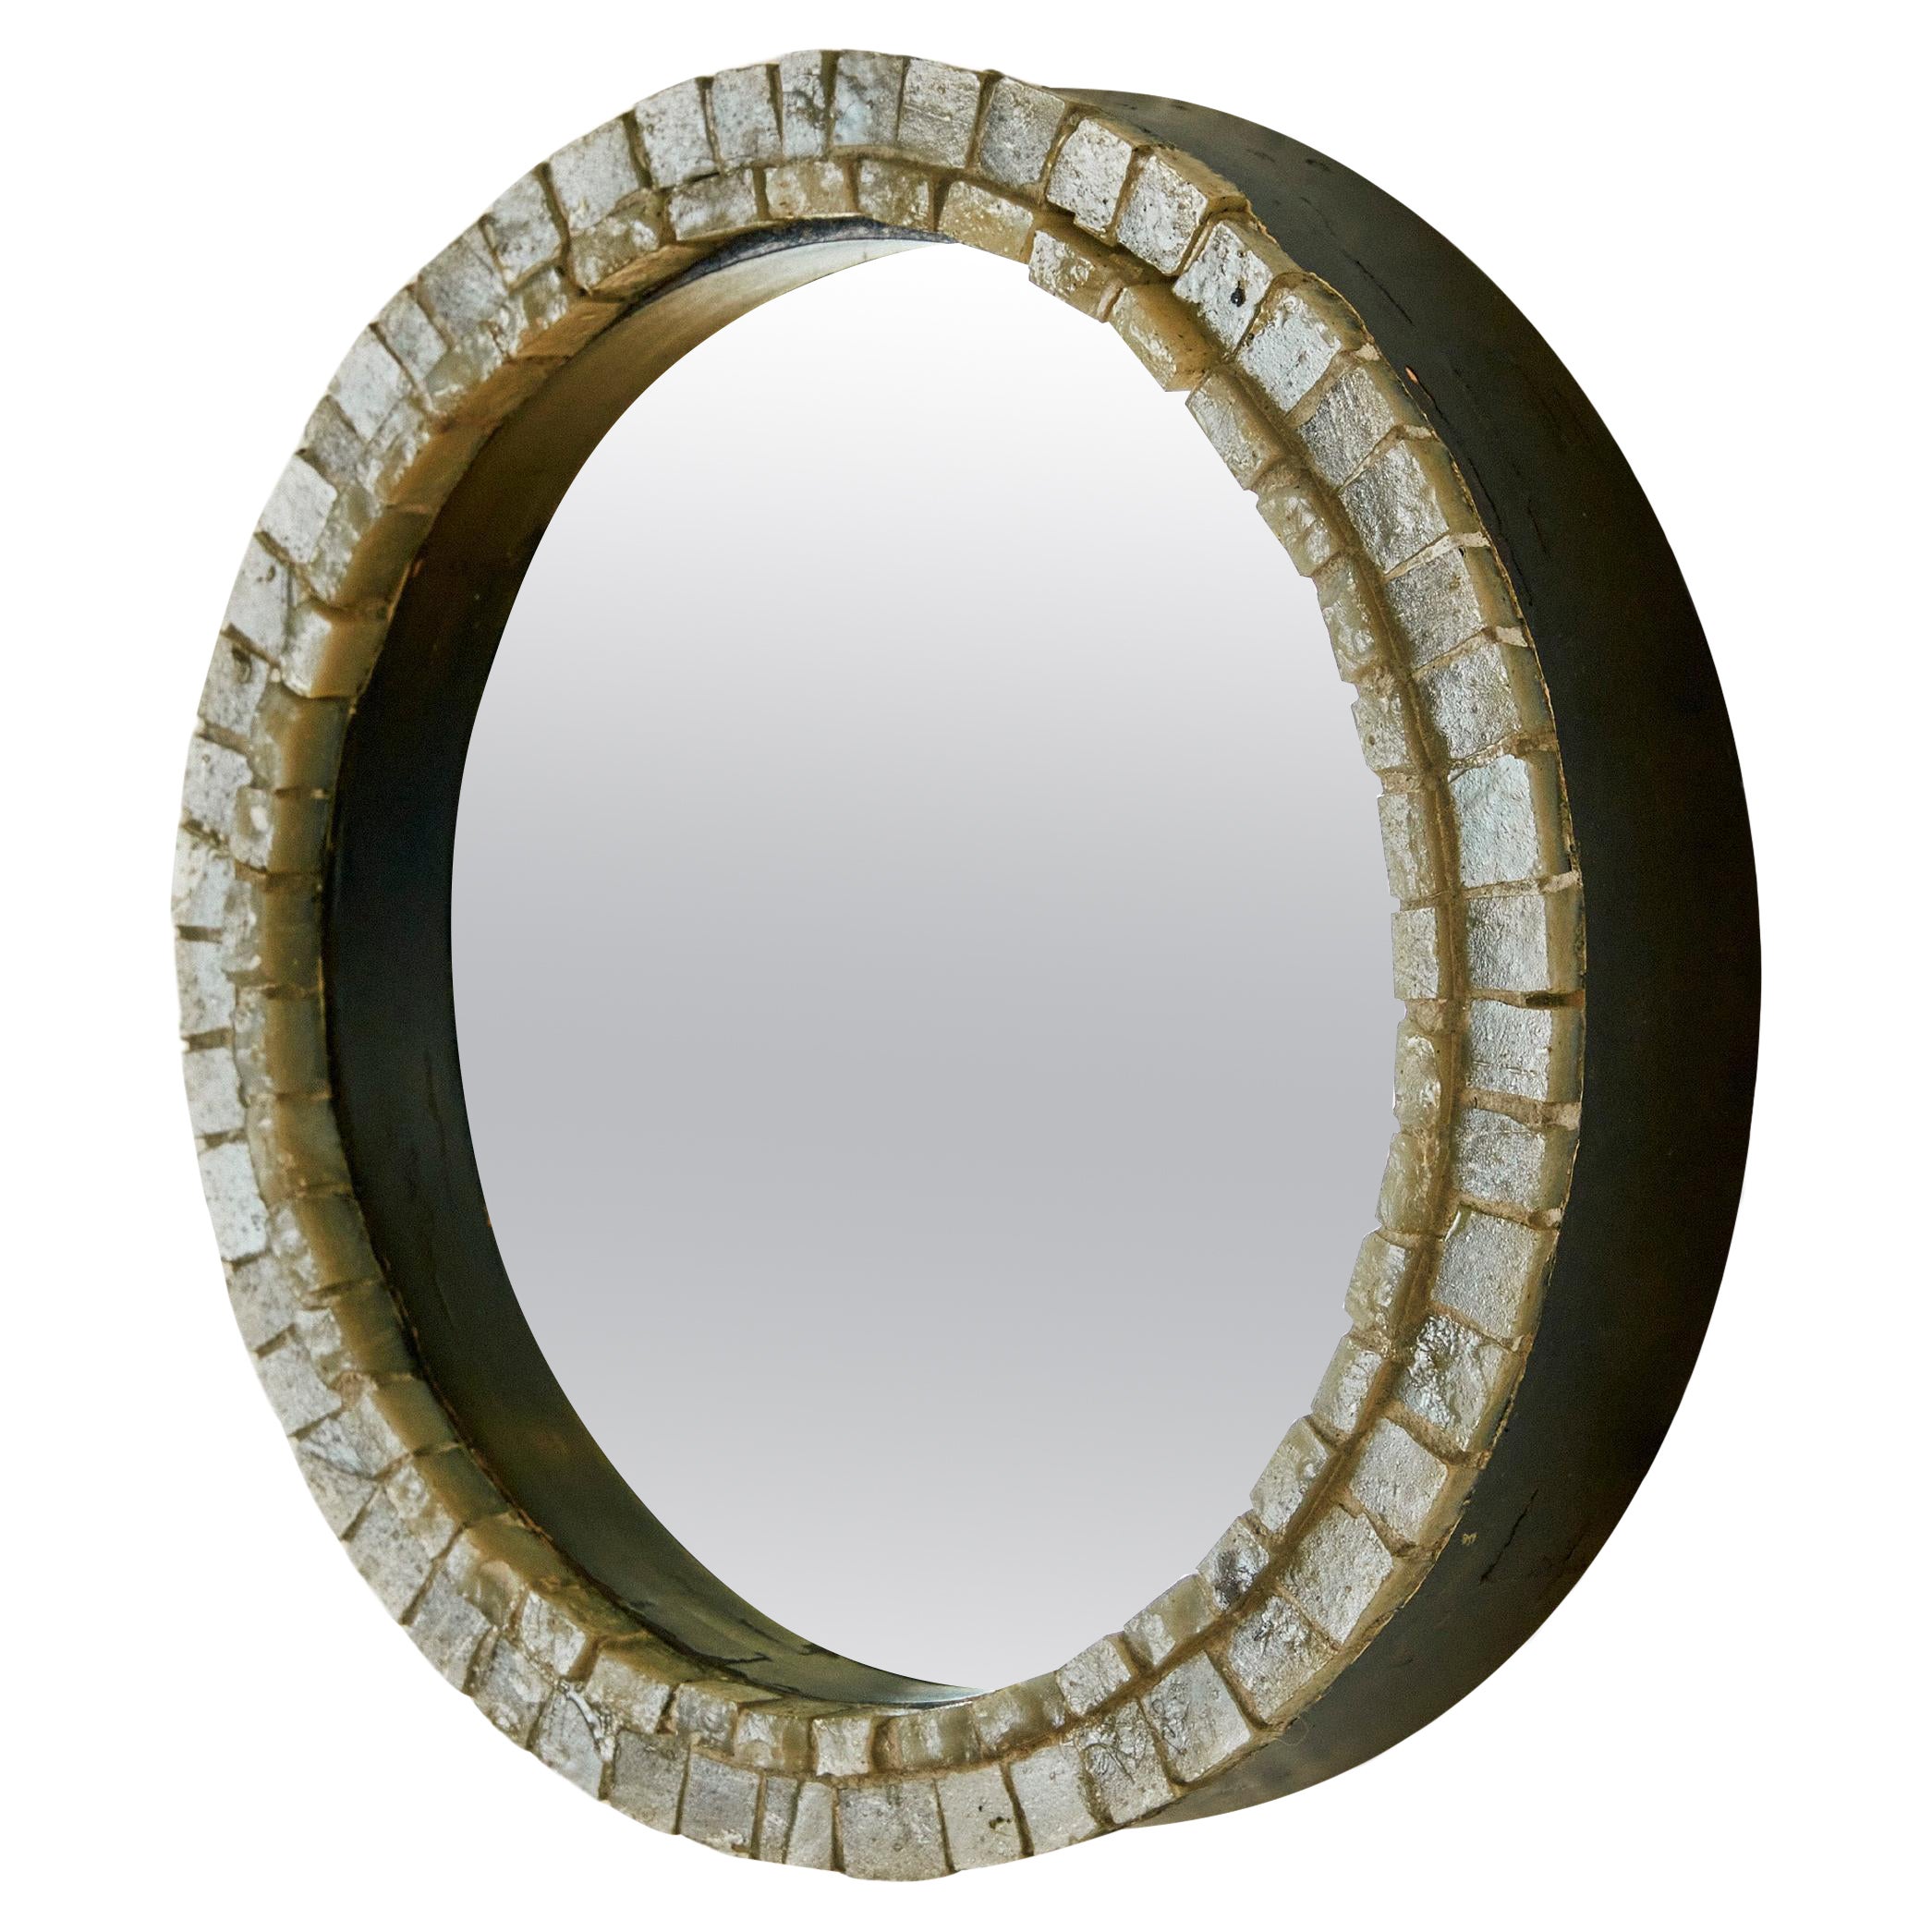 Mosaic and Wood Rounded Mirror